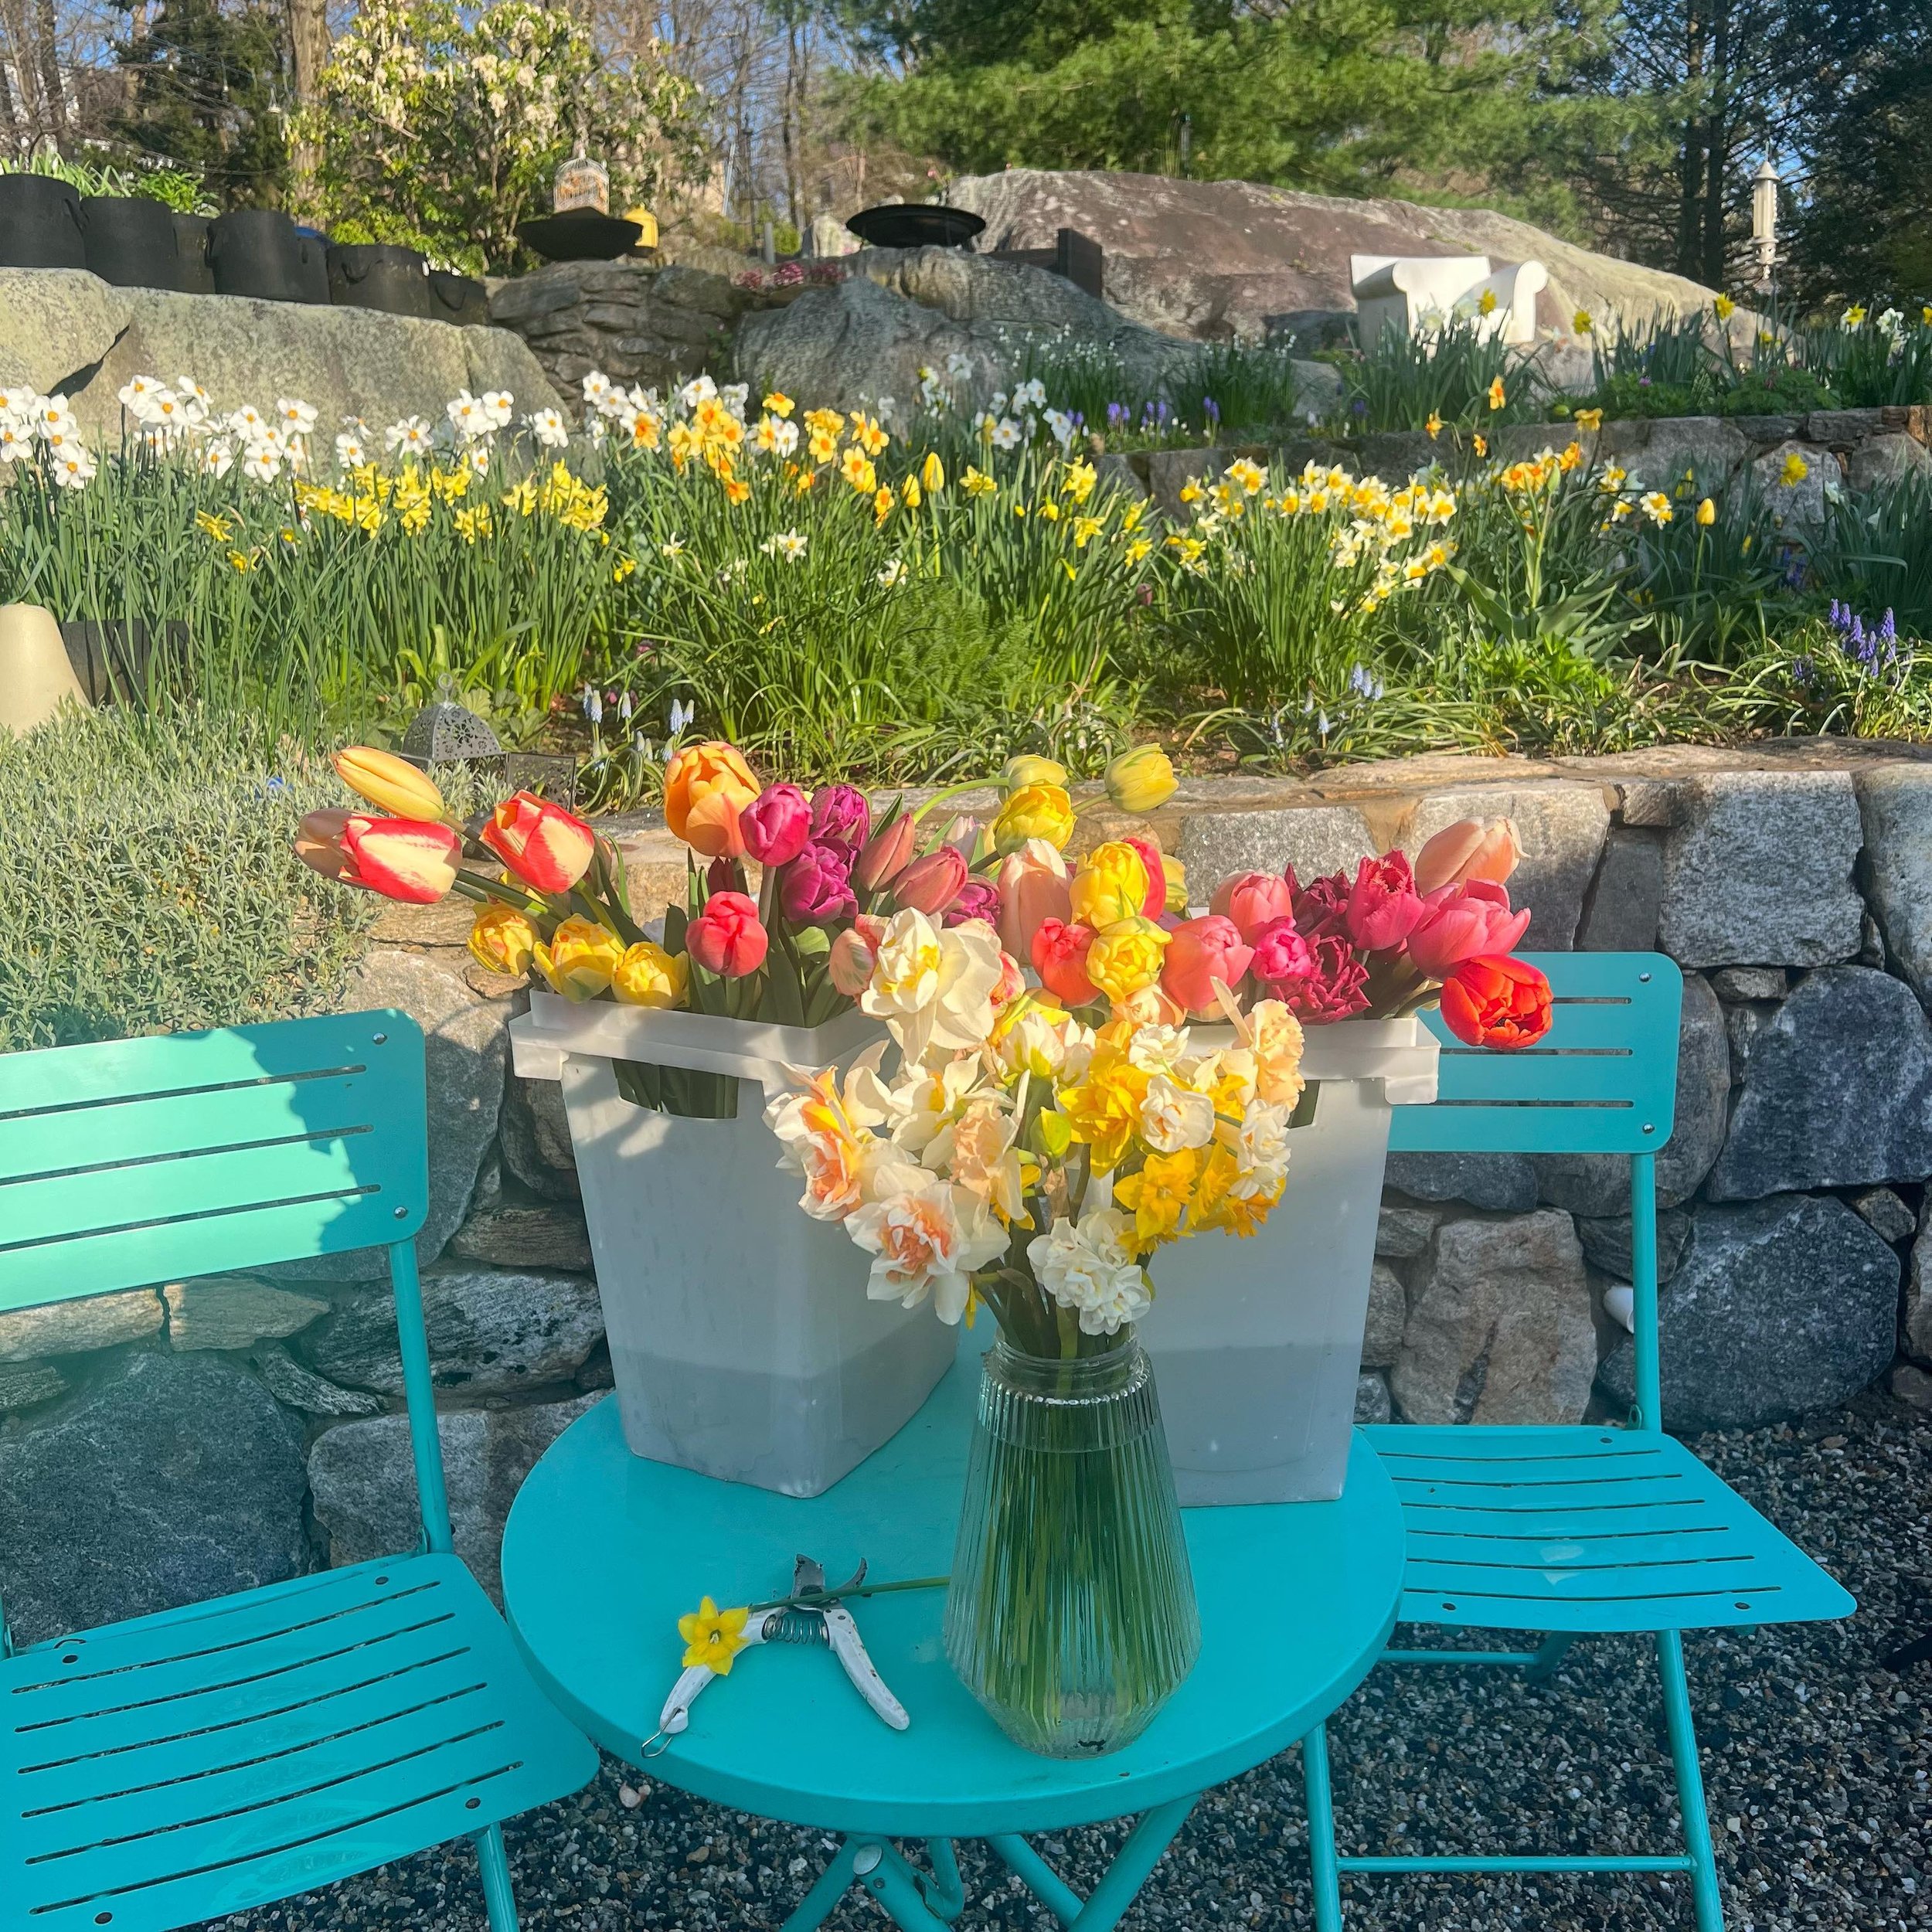 Spring morning routine 🌸. It starts early at 6 am. I harvest my flowers early in the morning to ensure best quality and freshness. They make a great gift to welcome a client in their new home, to say thank you to a teacher or care giver, to tell som